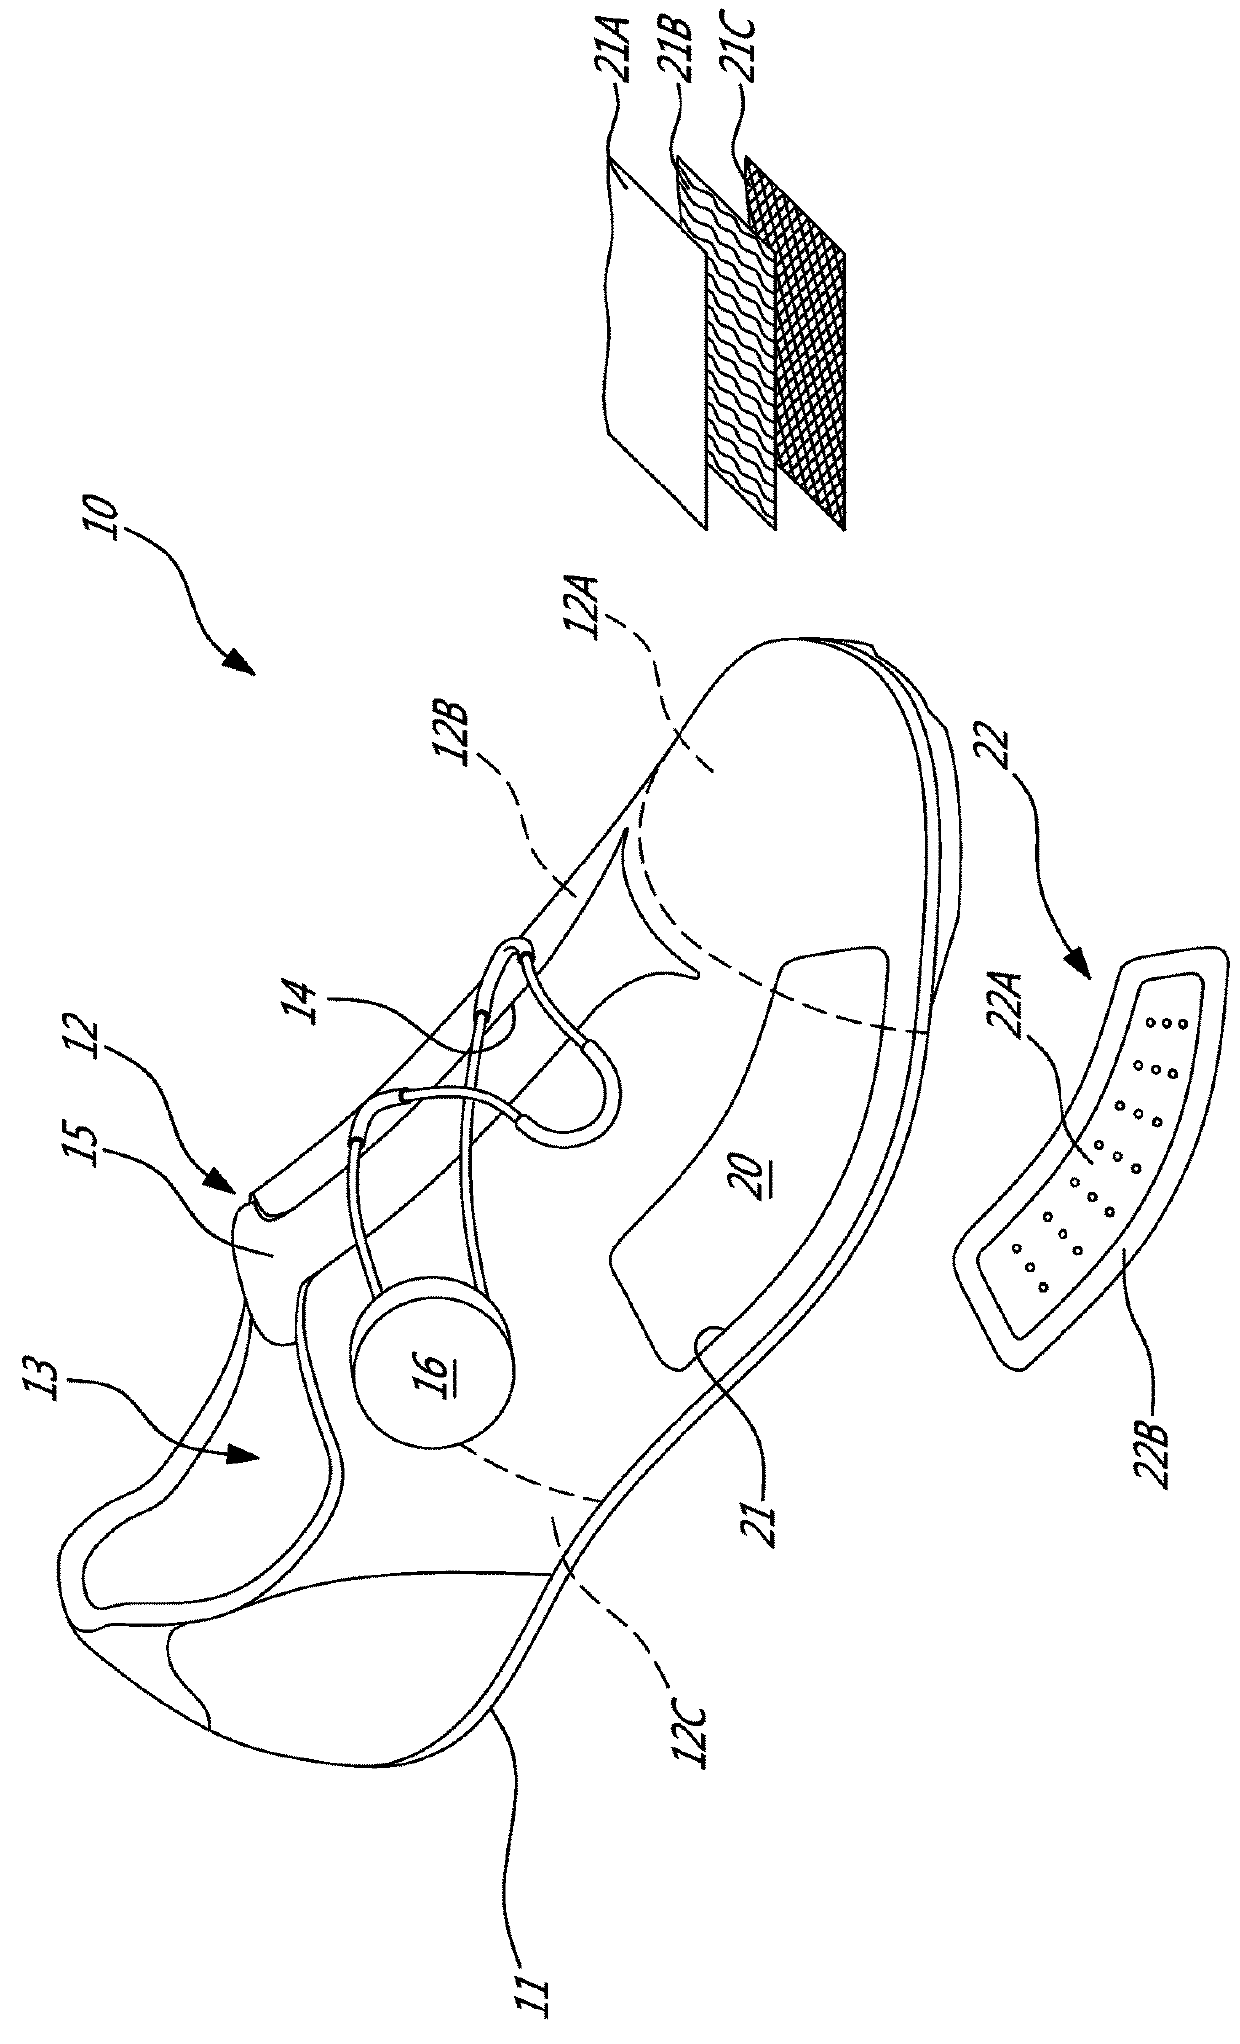 Cycling shoe with lateral metatarsal expansion zone